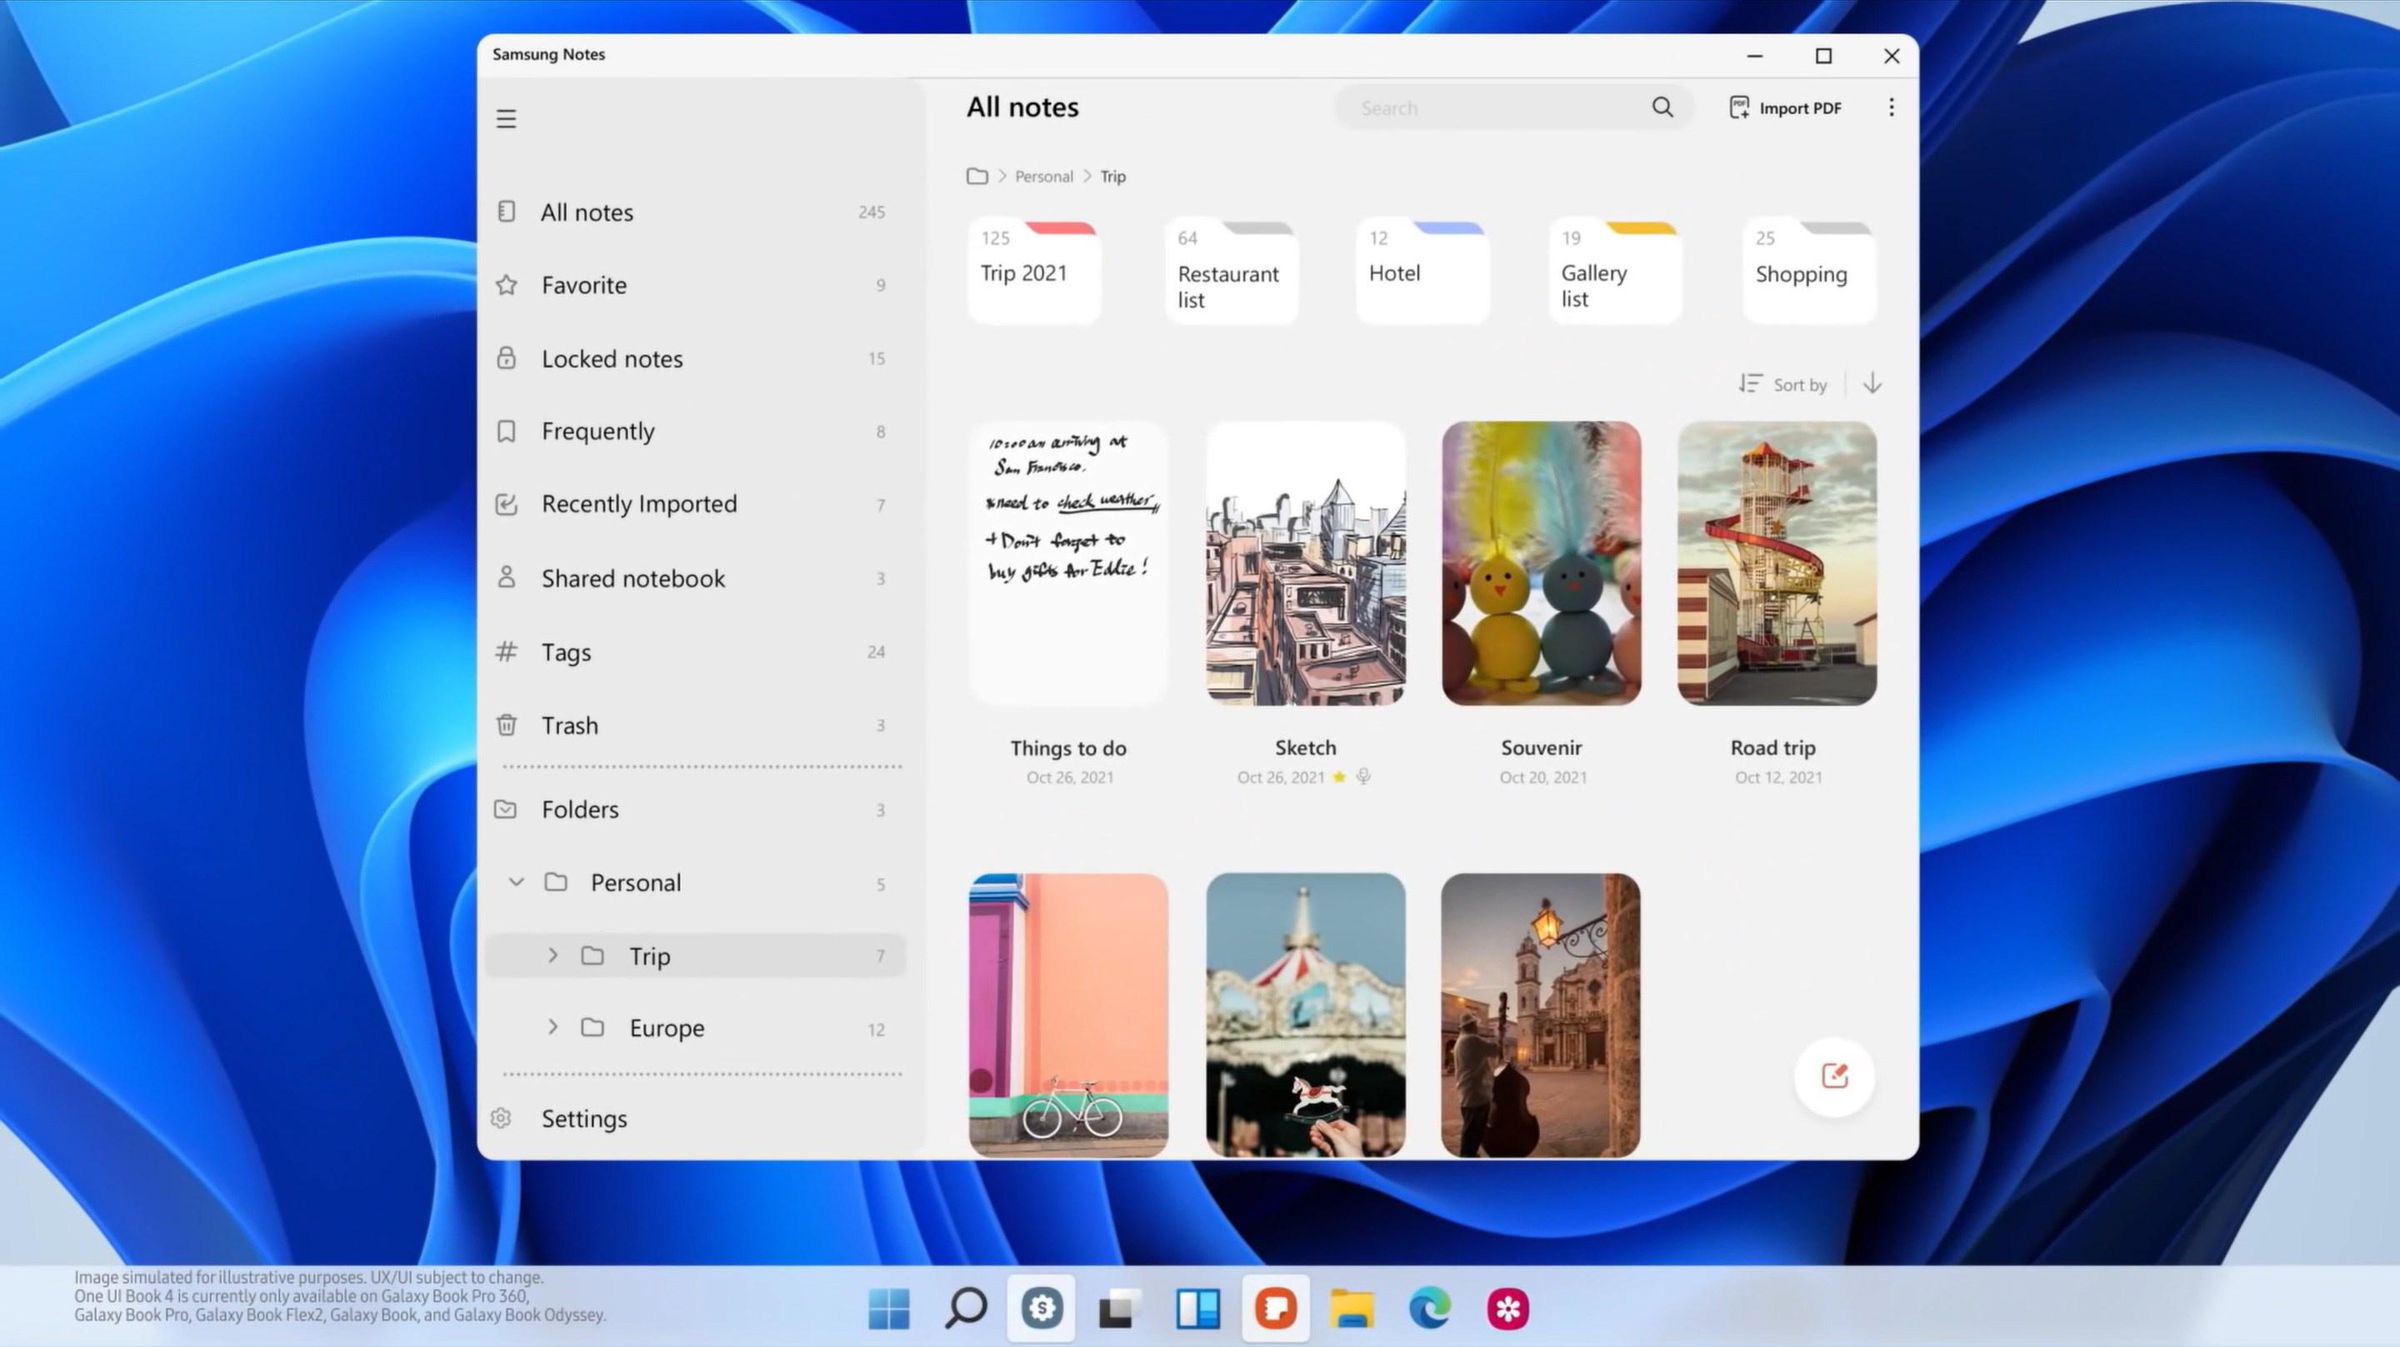 The new One UI 4 changes in Samsung’s Notes app for Windows.